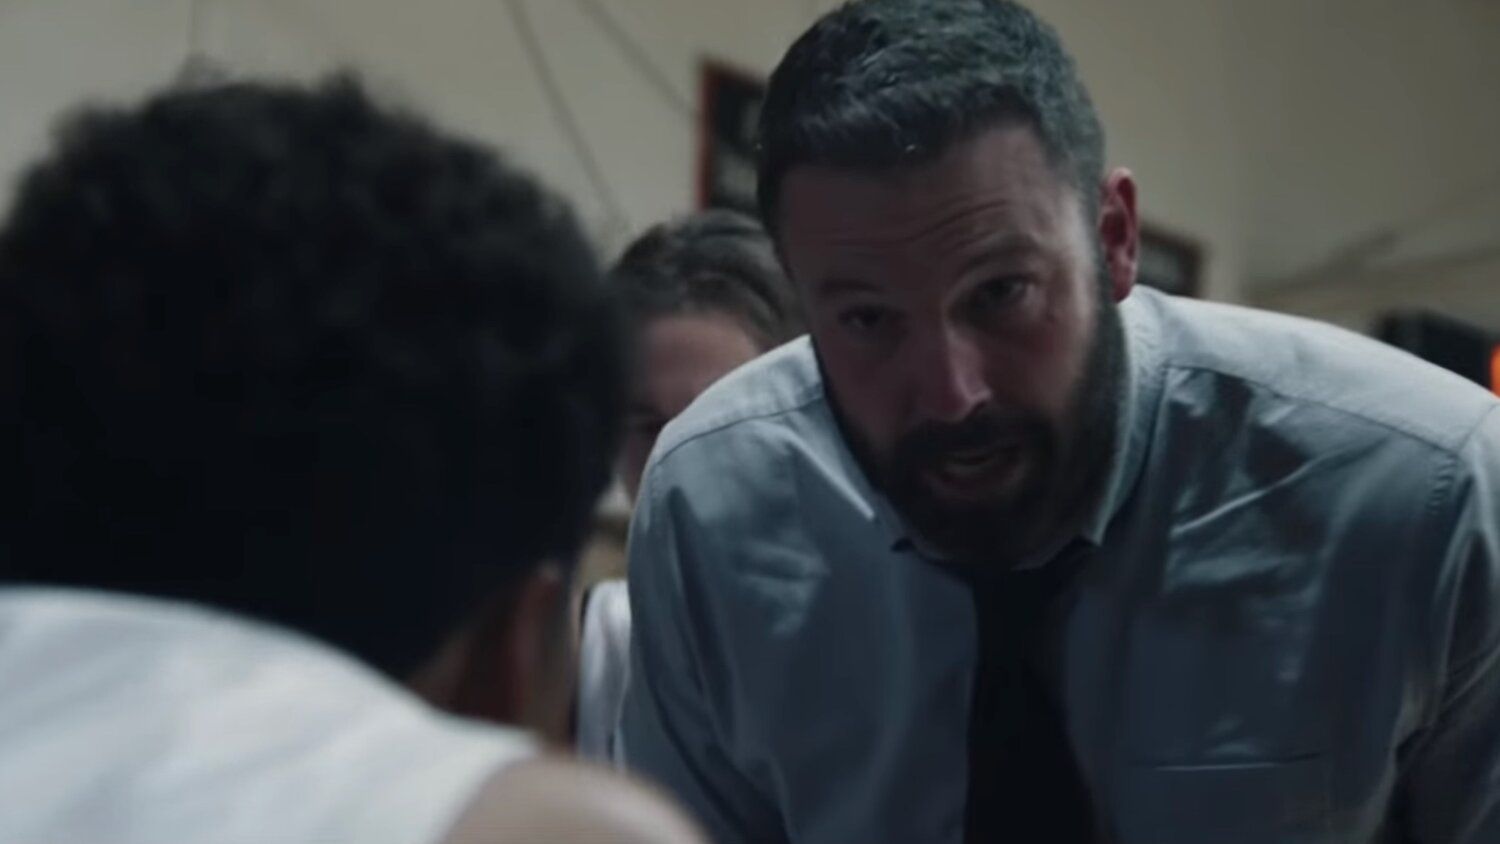 New for Ben Affleck's Uplifting and Inspiring Sports Film